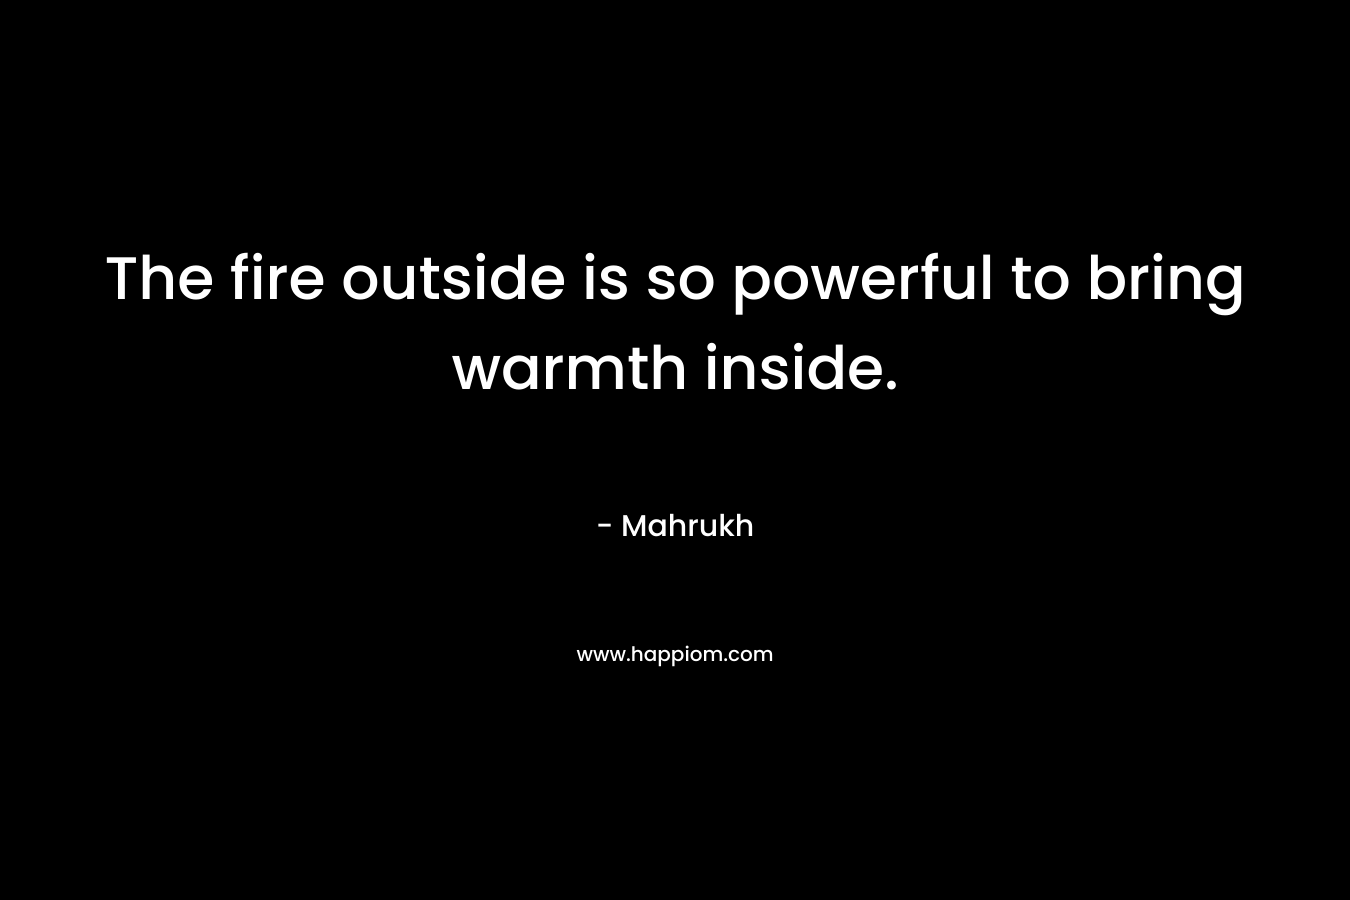 The fire outside is so powerful to bring warmth inside. – Mahrukh